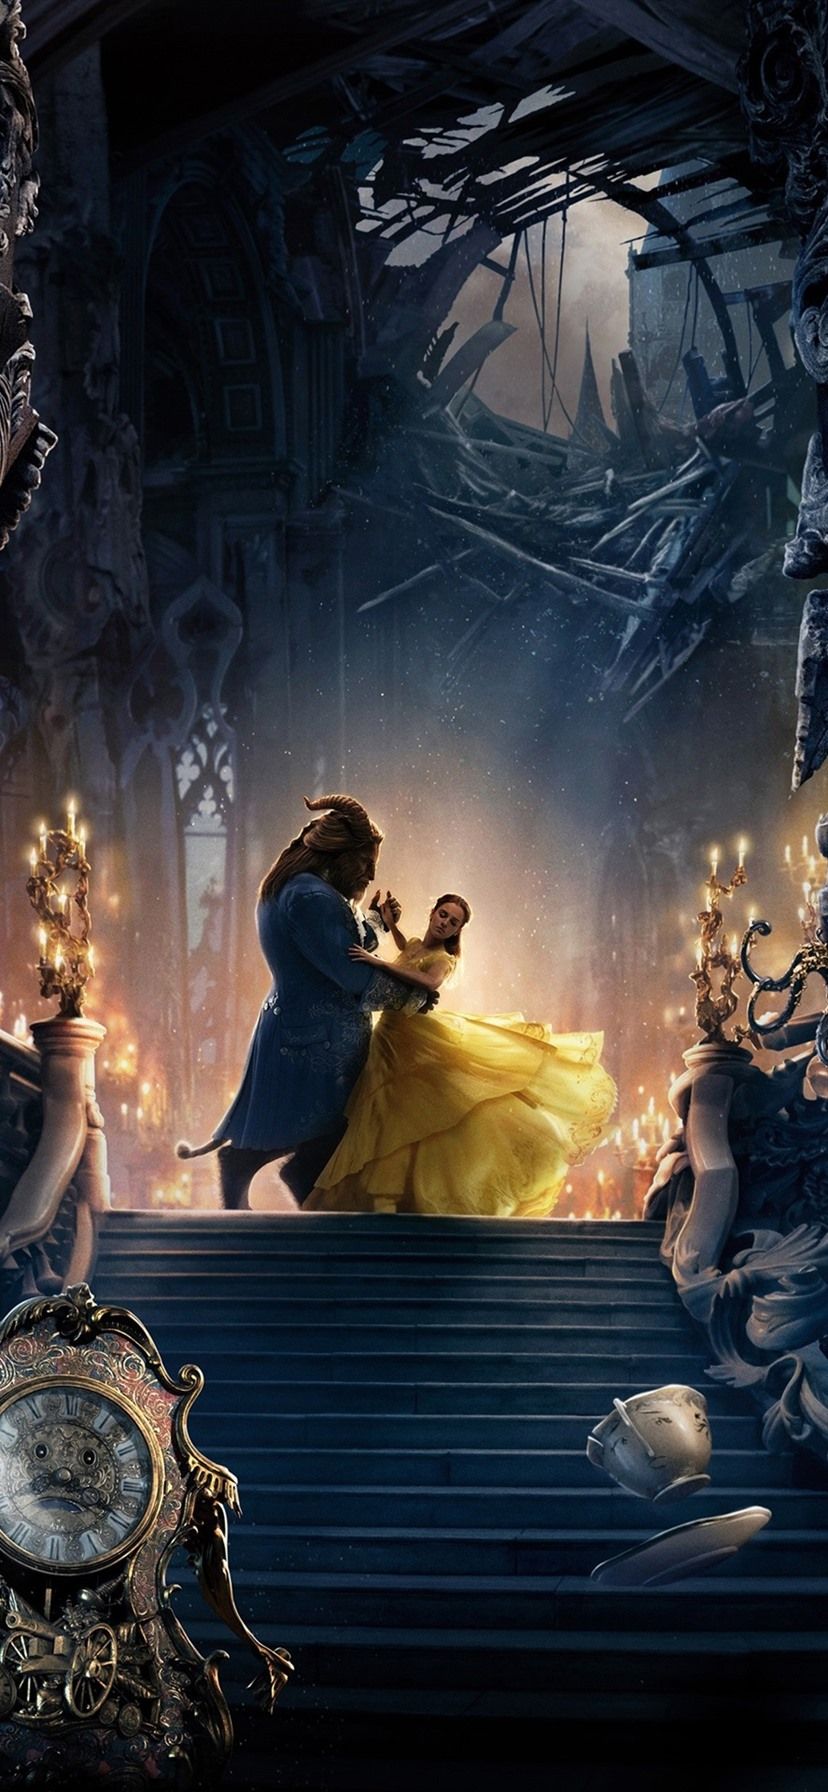 Beauty And The Beast, Disney Movie 2017 1080x1920 IPhone 8 7 6 6S